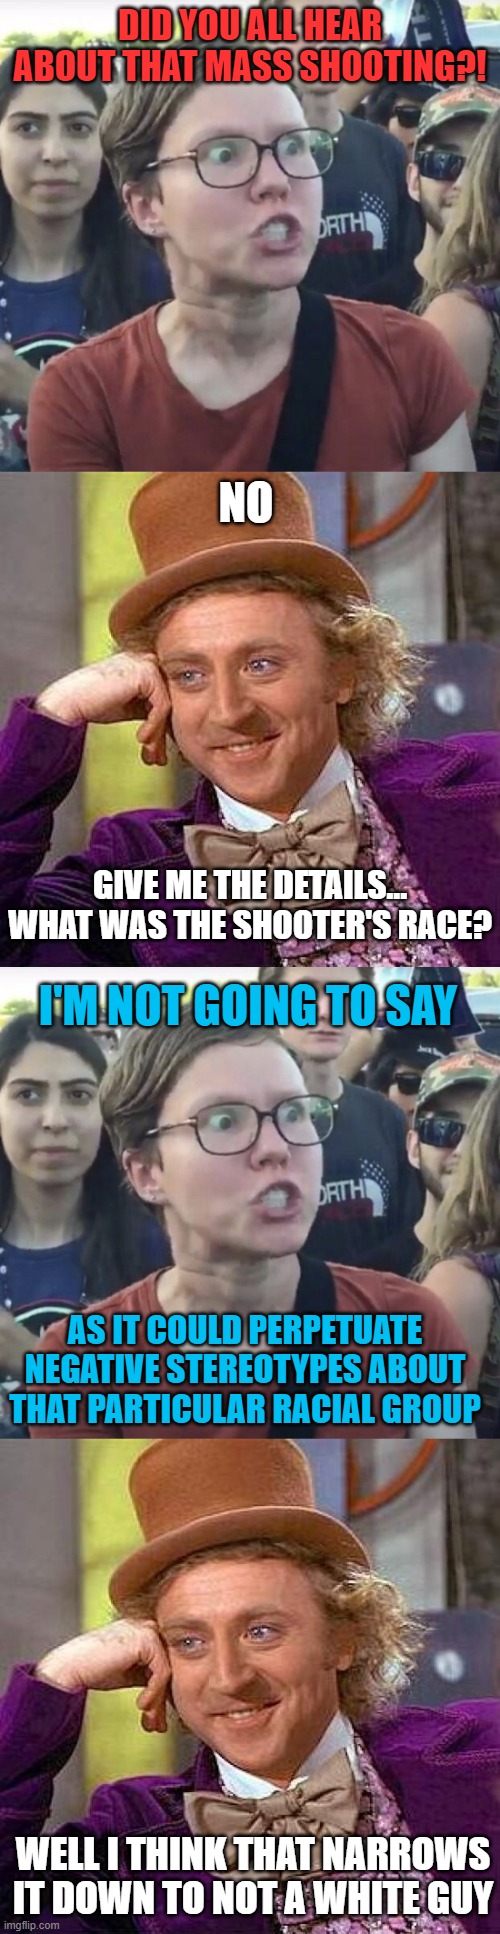 DID YOU ALL HEAR ABOUT THAT MASS SHOOTING?! NO; GIVE ME THE DETAILS... WHAT WAS THE SHOOTER'S RACE? I'M NOT GOING TO SAY; AS IT COULD PERPETUATE NEGATIVE STEREOTYPES ABOUT THAT PARTICULAR RACIAL GROUP; WELL I THINK THAT NARROWS IT DOWN TO NOT A WHITE GUY | image tagged in triggered feminist,memes,creepy condescending wonka,race,shooting,white guy | made w/ Imgflip meme maker